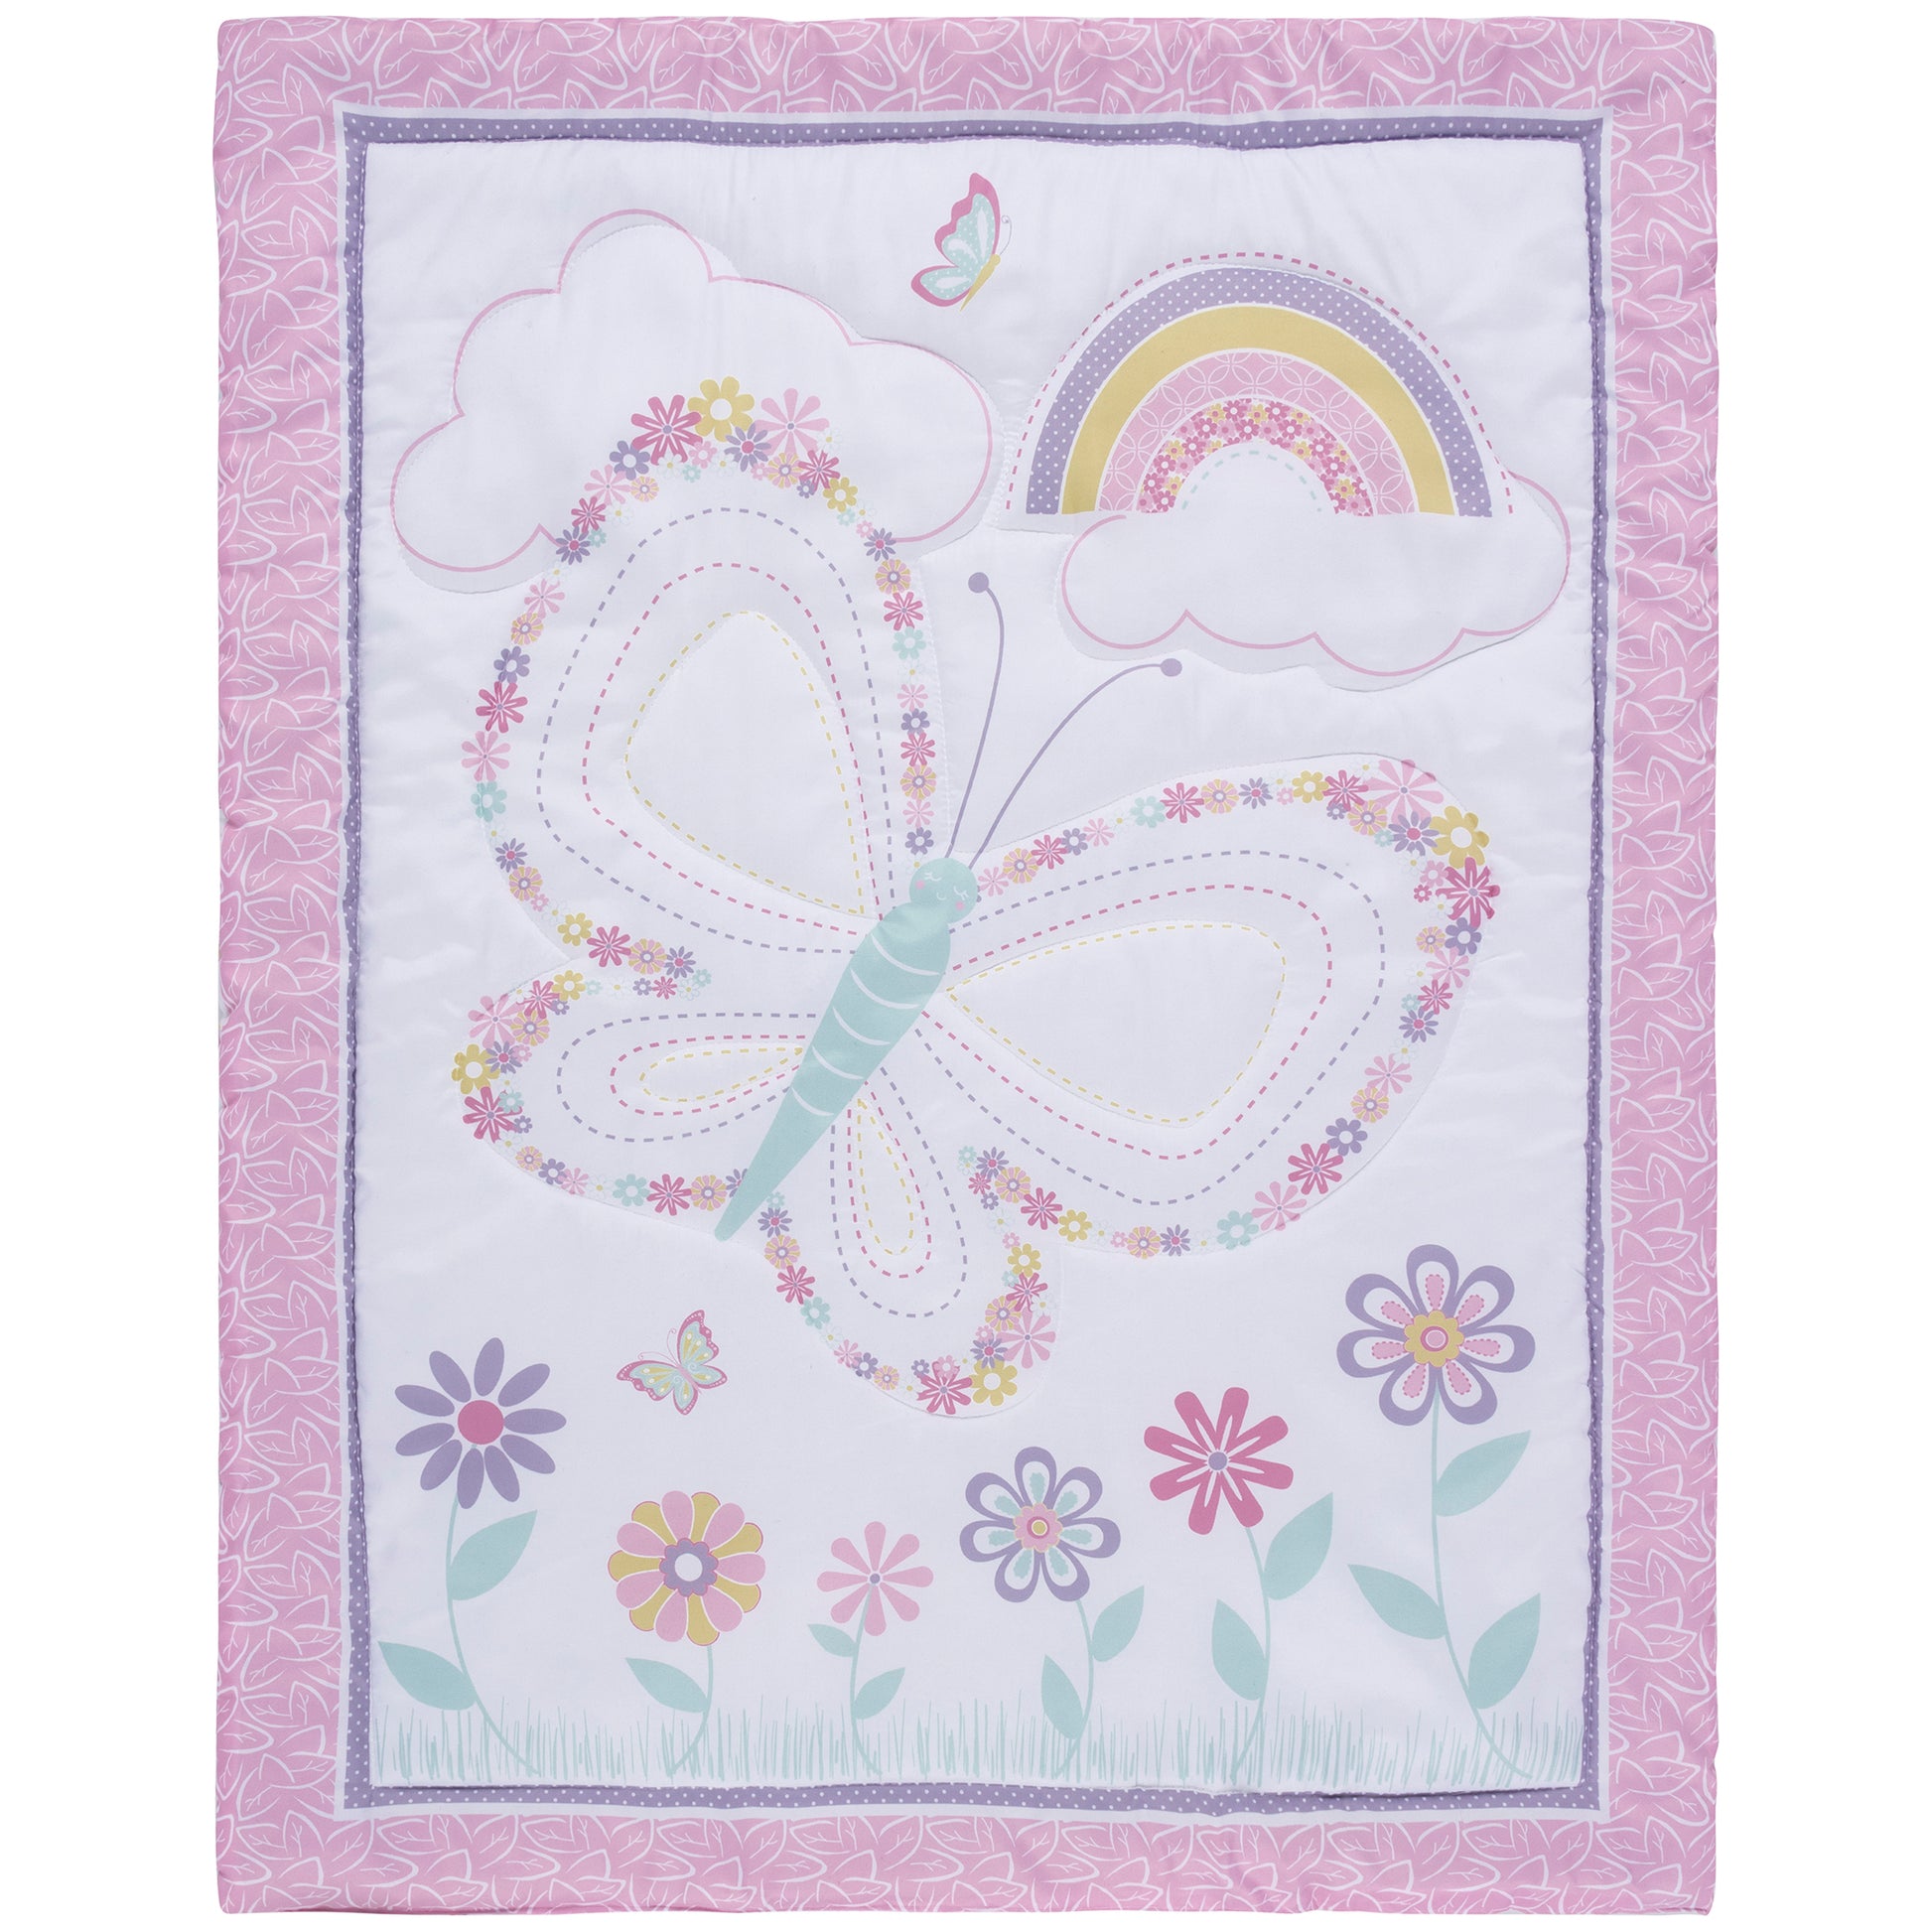  Floral Butterfly 4 Piece Crib Bedding Set; nursery quilt features flowers growing with a big floral butterfly flying into the clouds where a rainbow appears in the sky. The quilt is bordered with a small orchid and white polka dot trim and light pink wit